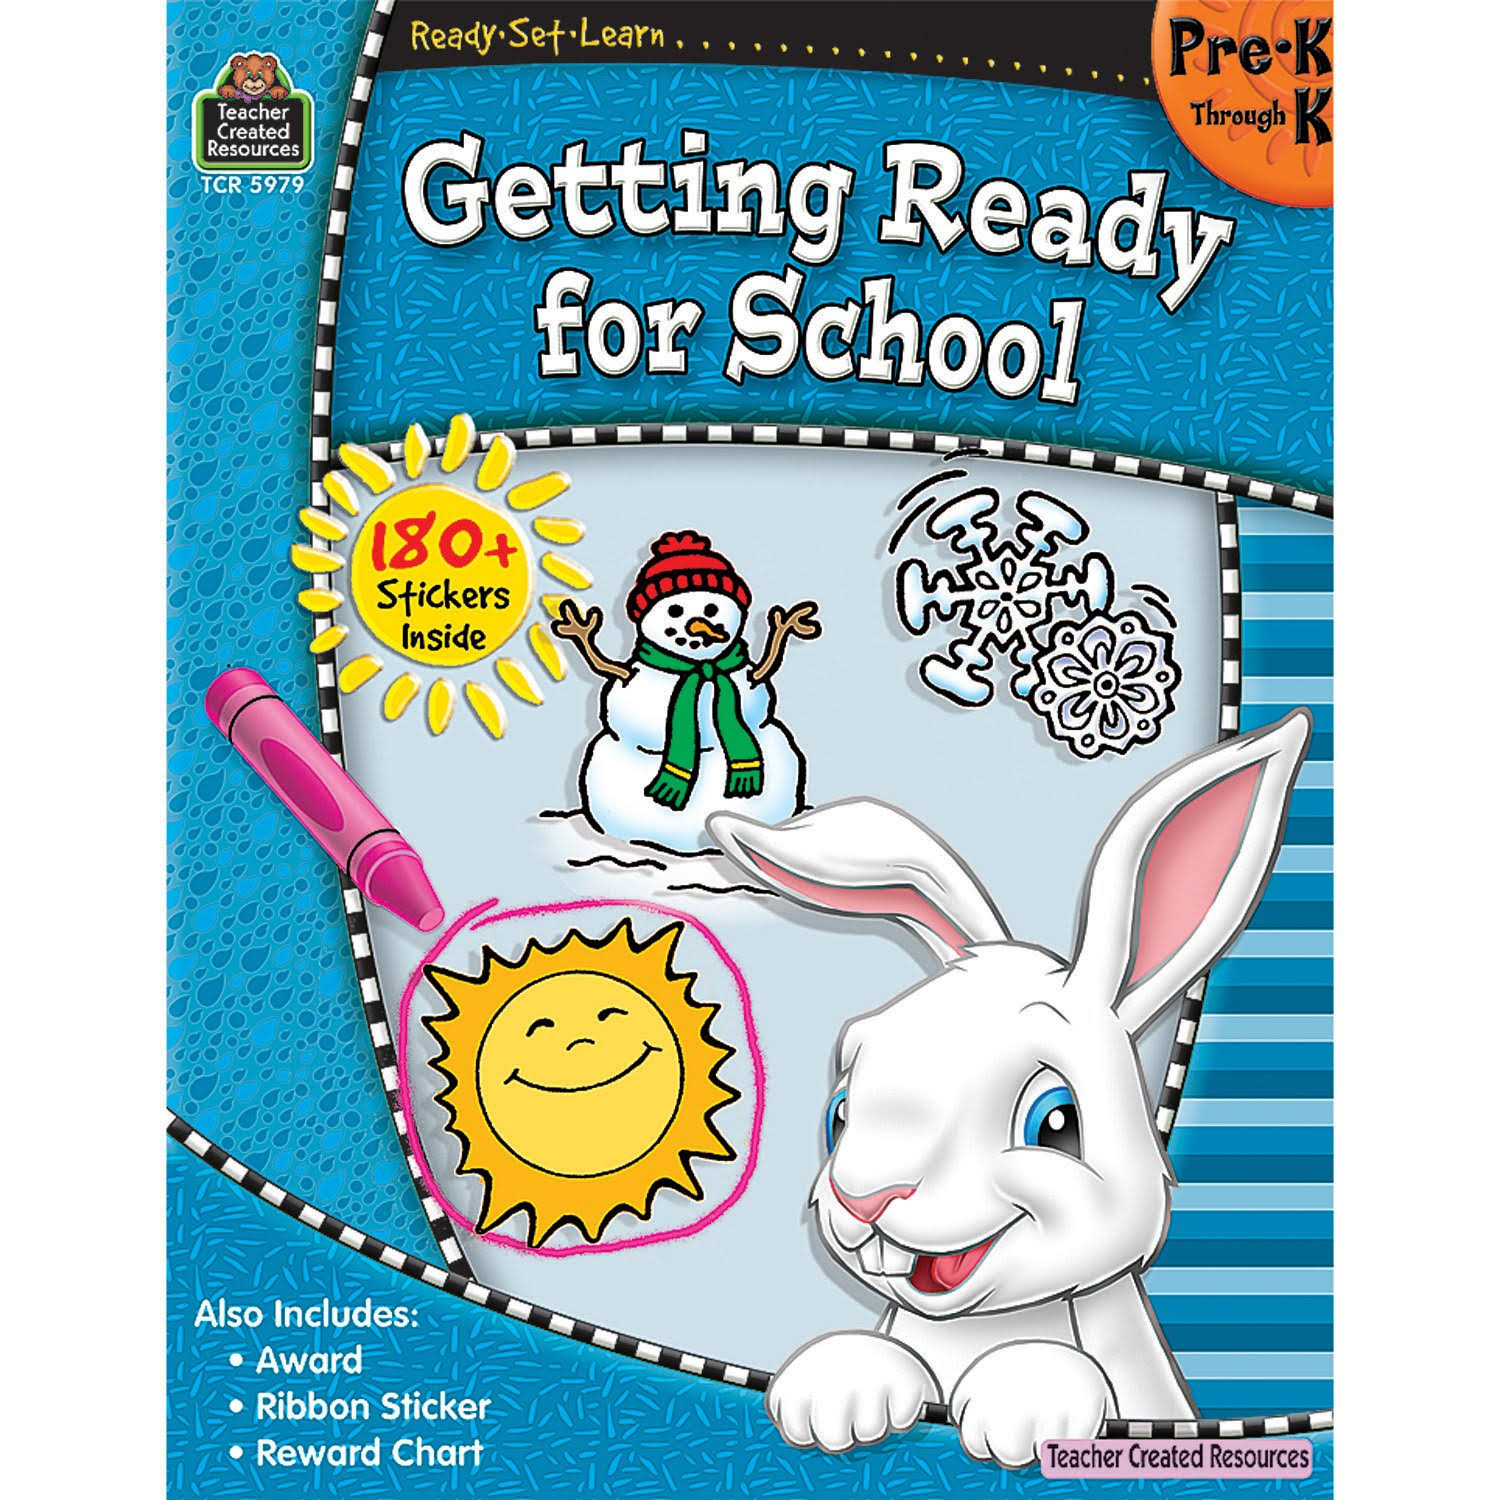 Ready Set Learn: Getting Ready for School Pre K - Teacher Created Resources